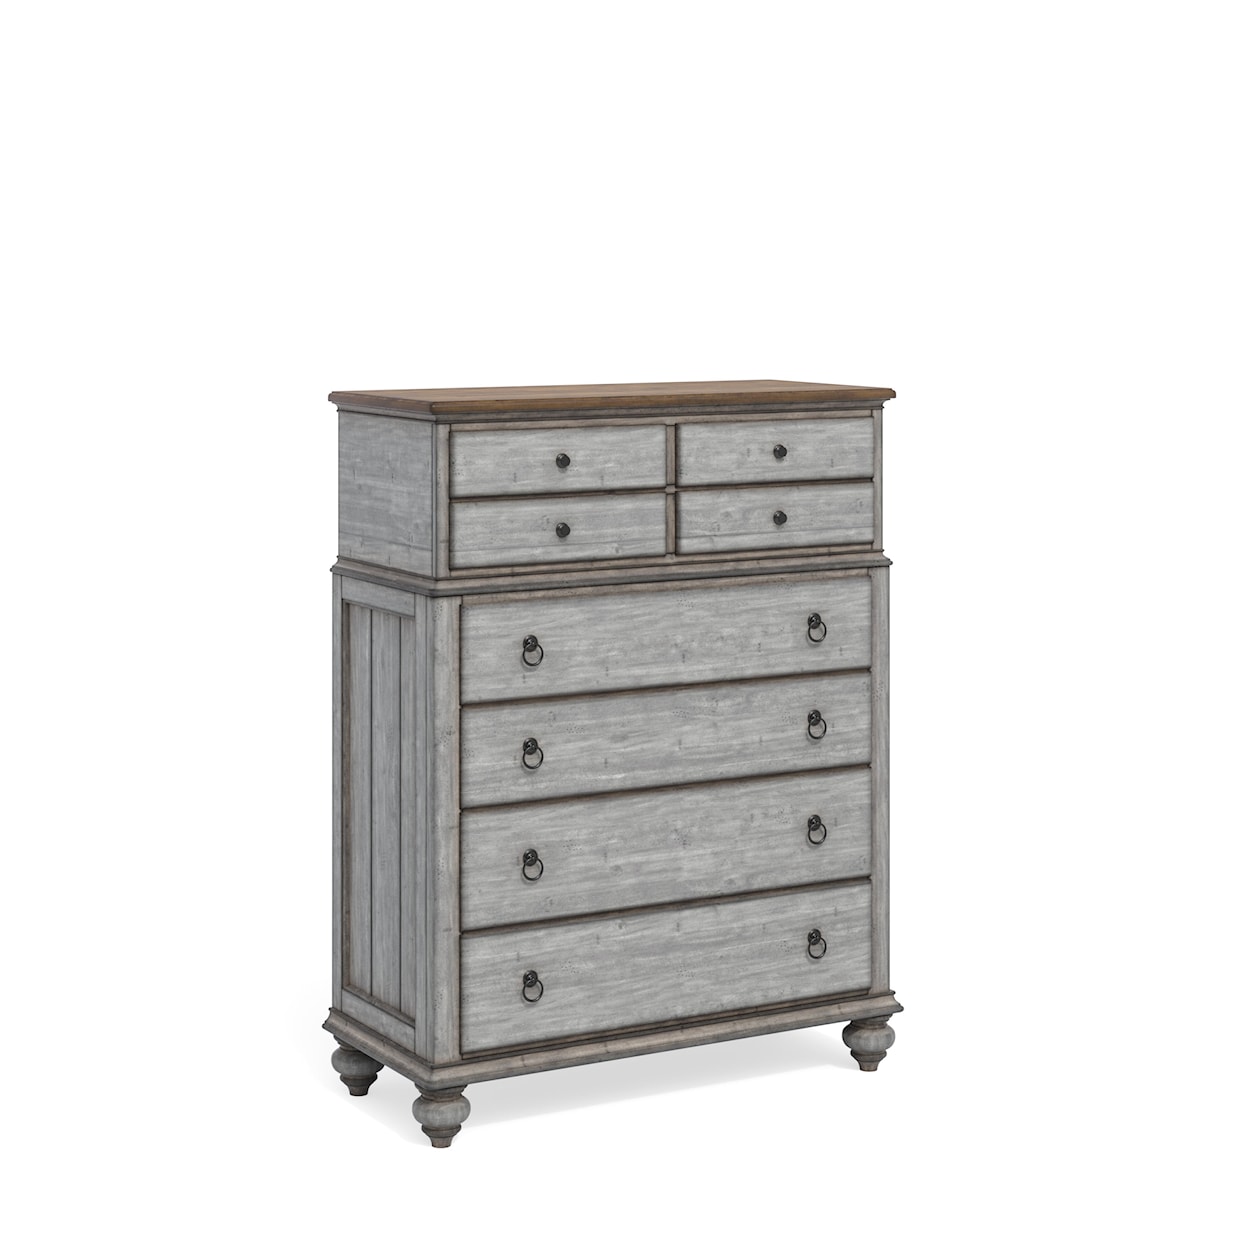 Flexsteel Wynwood Collection Plymouth Chest of Drawers